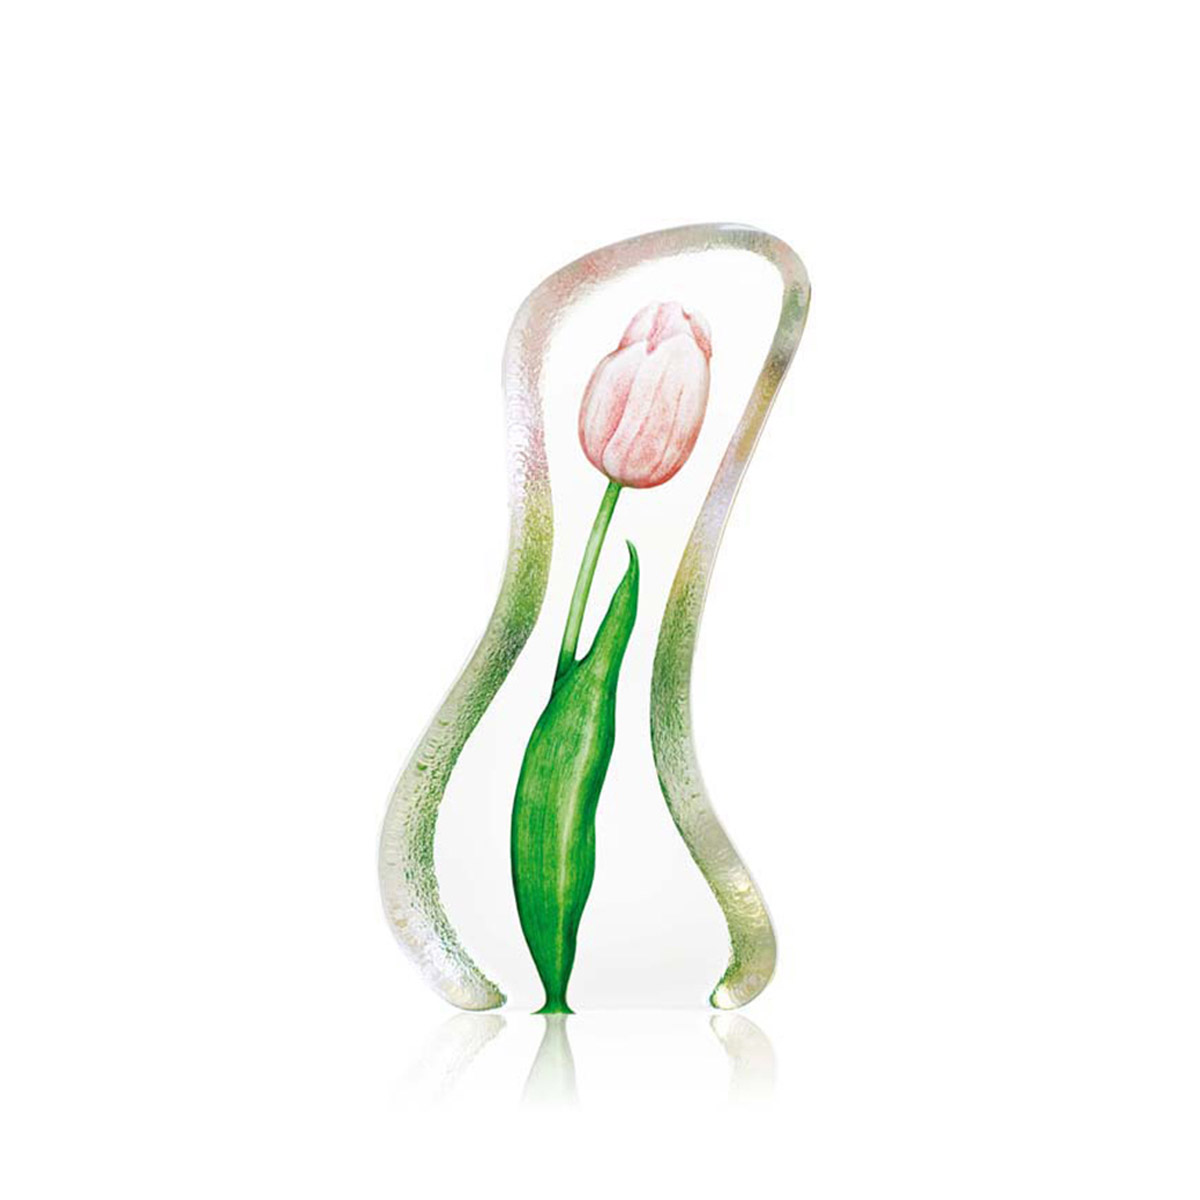  Tulip Floral Fantasy Series Ornaments Decorations Blessing Gifts